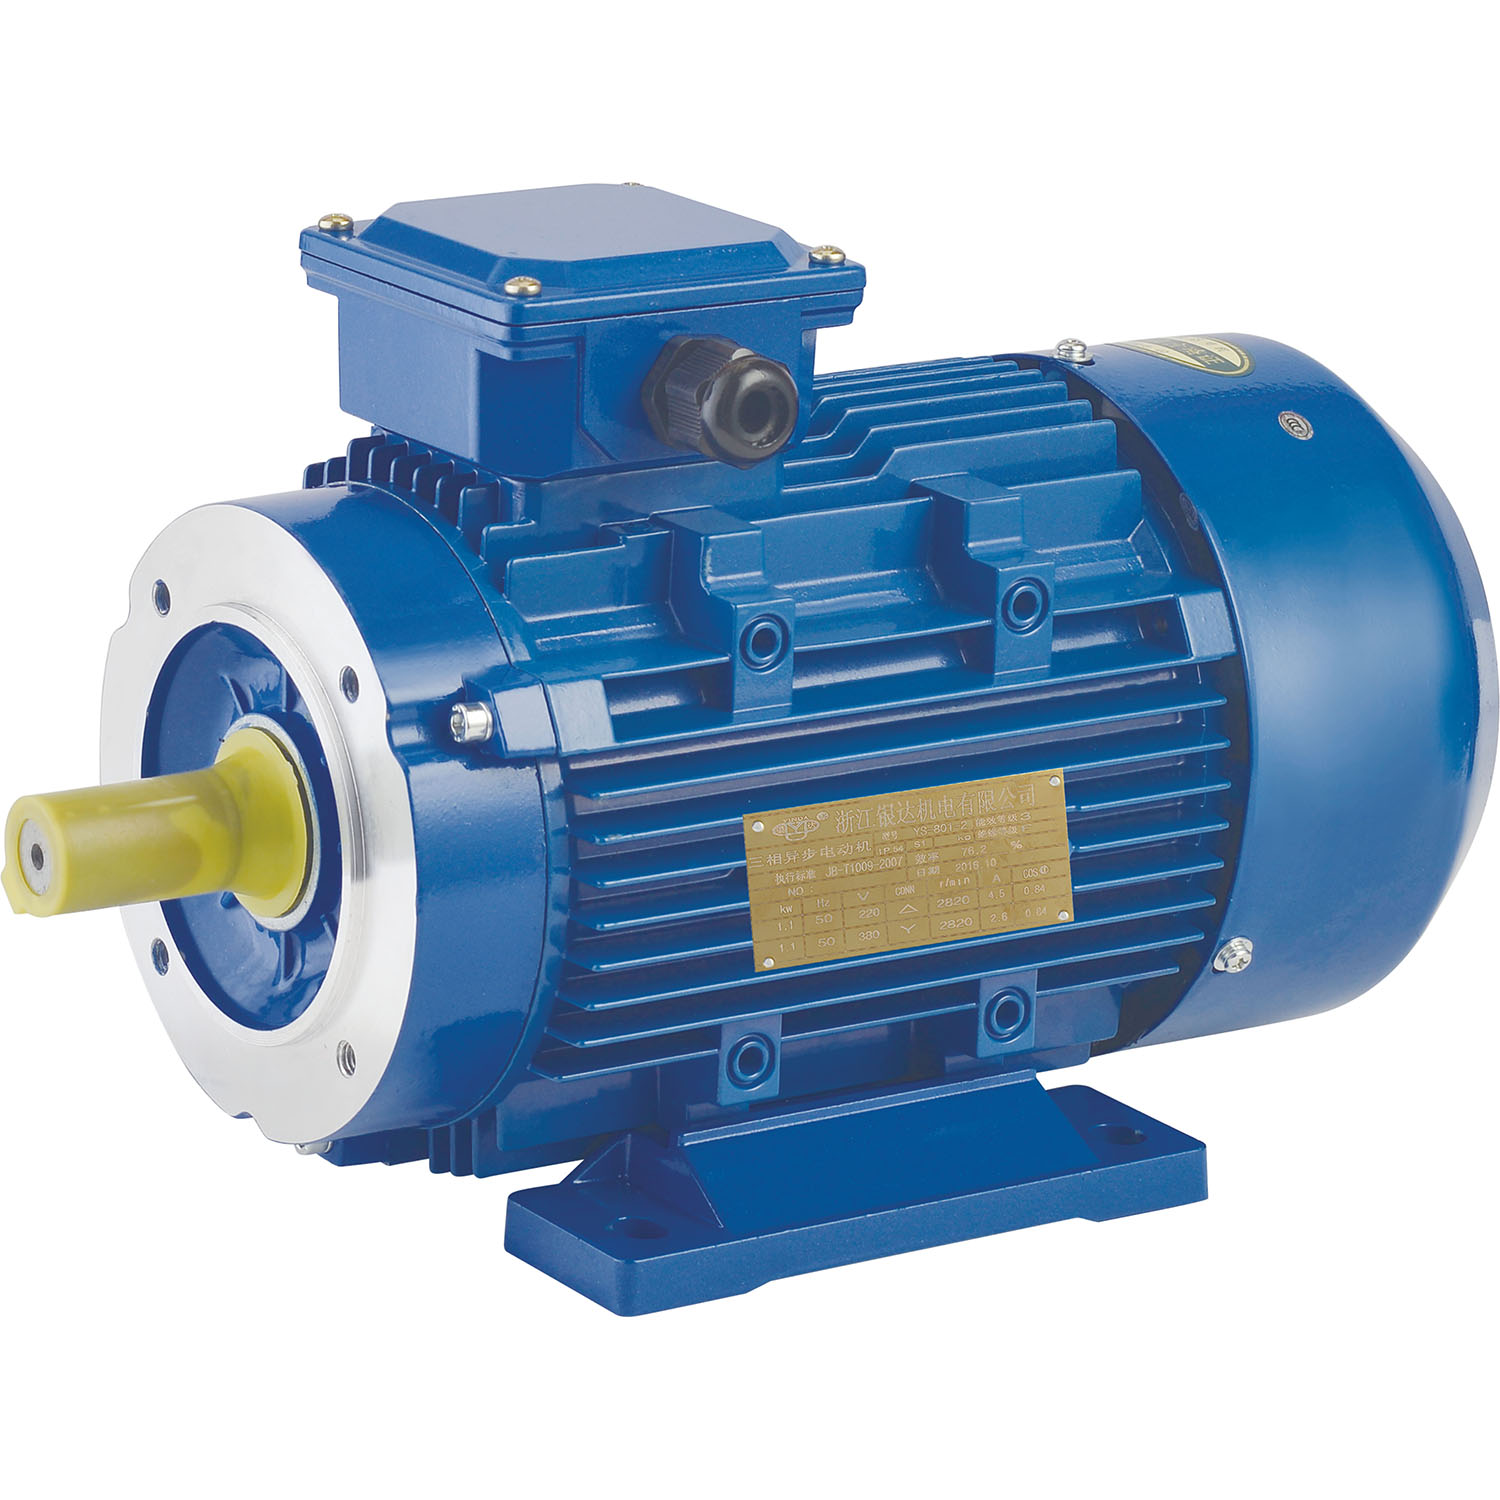 YS-633-4 0.25KW 0.35HP aluminum cylinder series high efficiency three-phase asynchronous motor